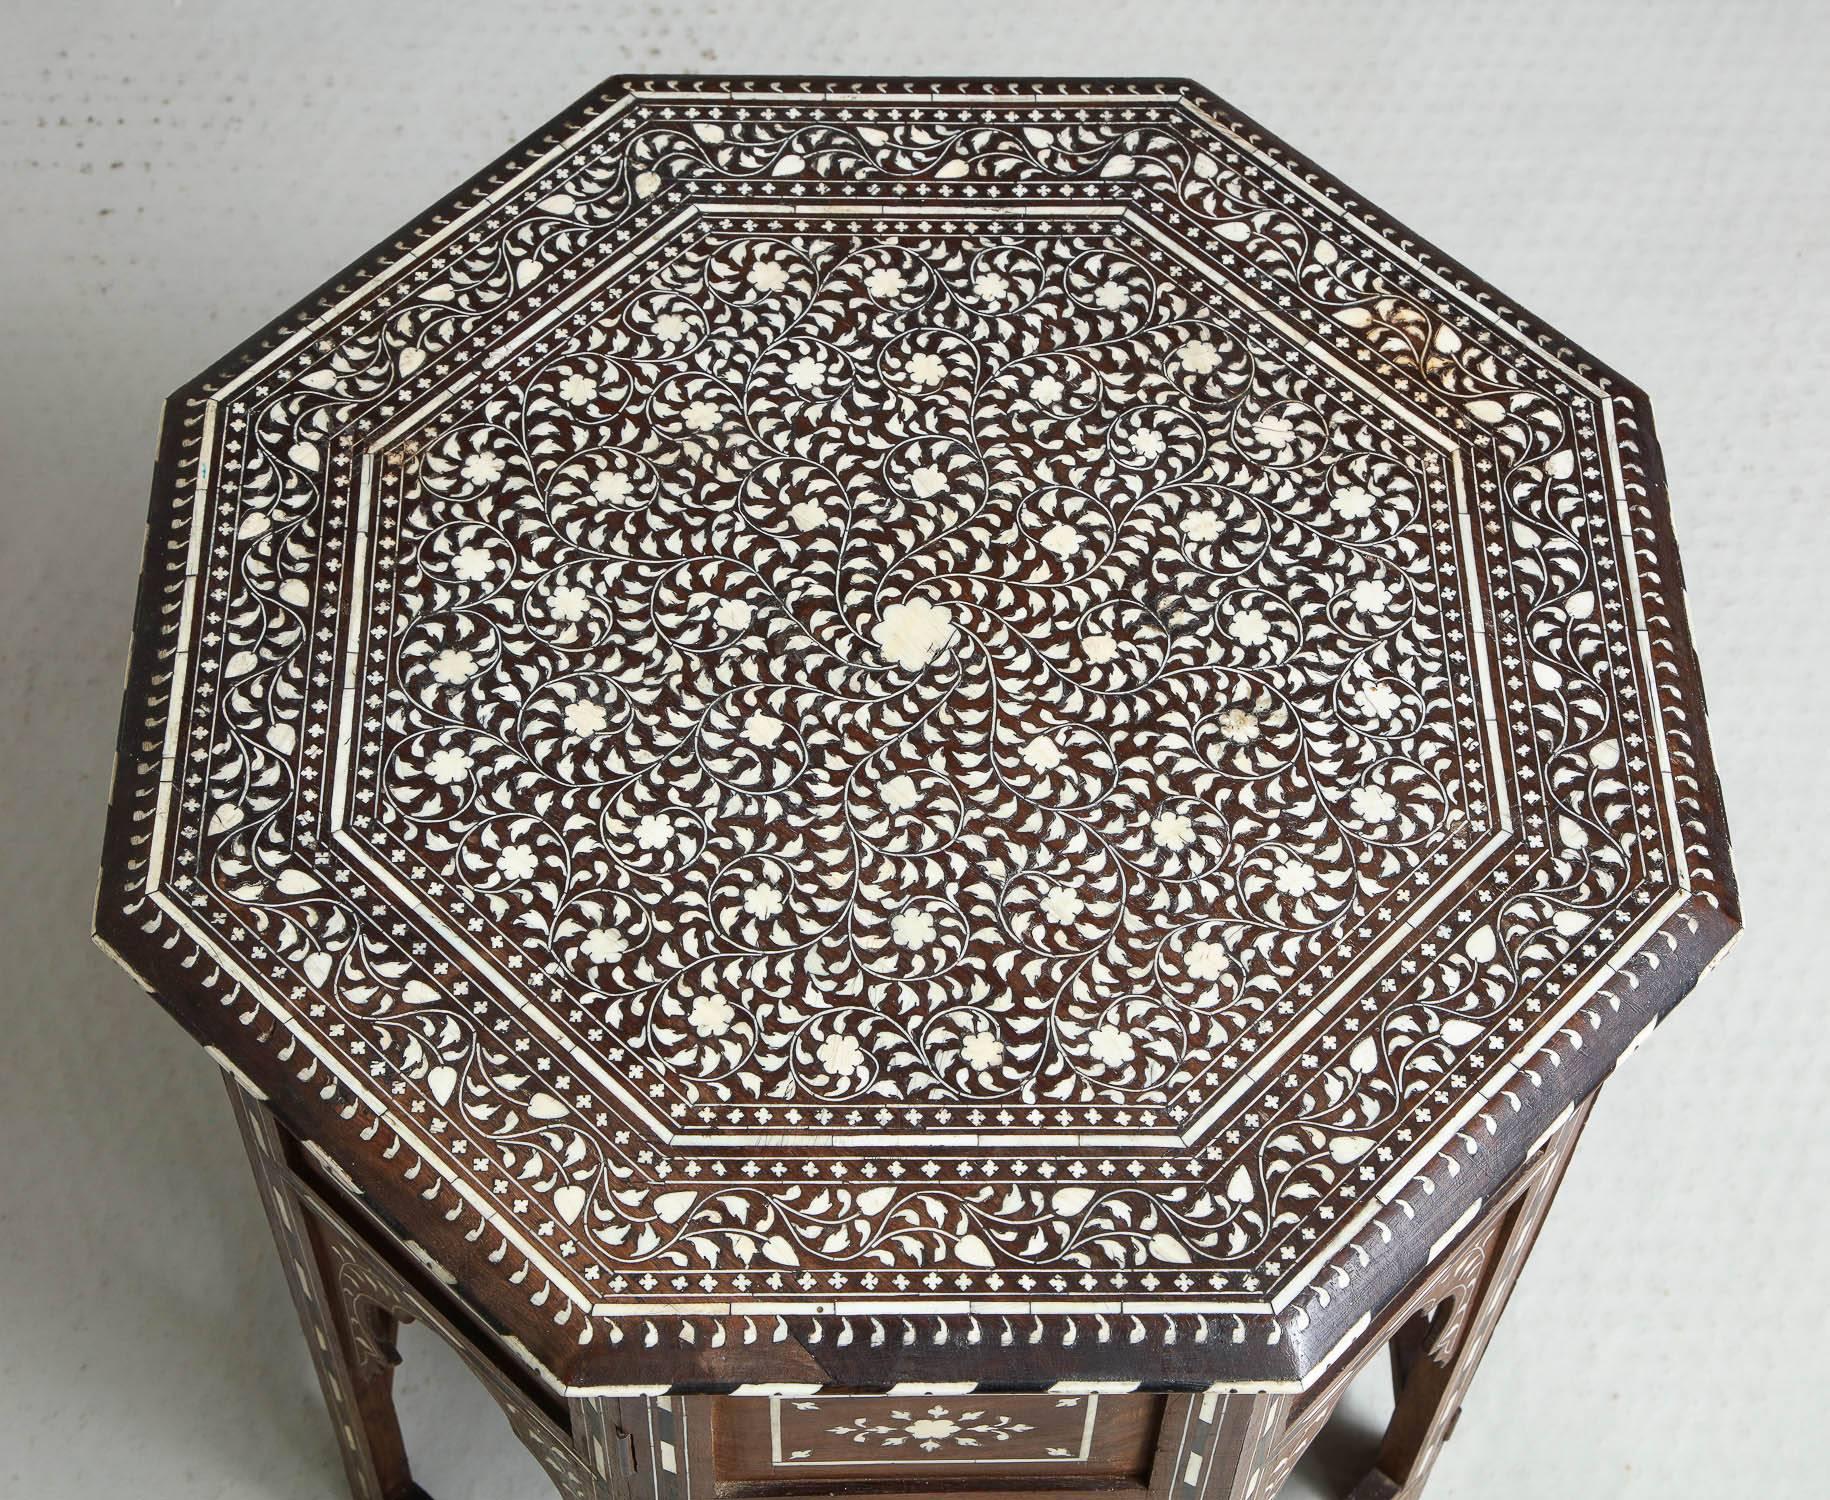 Very fine 19th Century Indian sandalwood table profusely inlaid with bone and floral decoration, standing on accordion hinged base with bone and ebony inlay, the whole with rich color and patination and in remarkably intact condition.